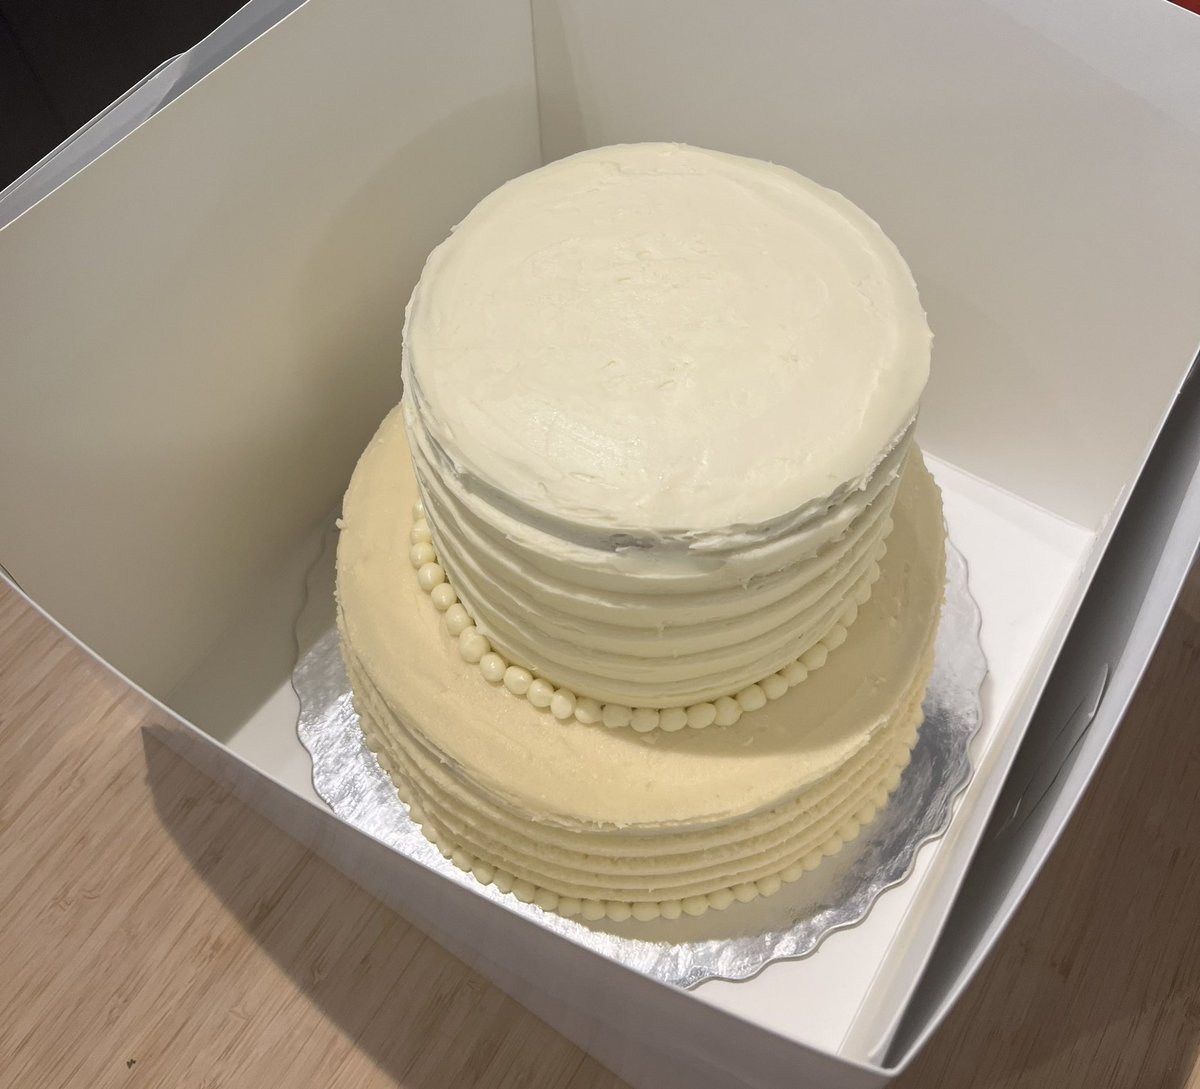 Today at the @chronicle I find myself with my first cake deadline, so I present you with a tease. And why a publication focused on higher ed needed a wedding cake? Well you’ll have to stay tuned for a future chron piece.